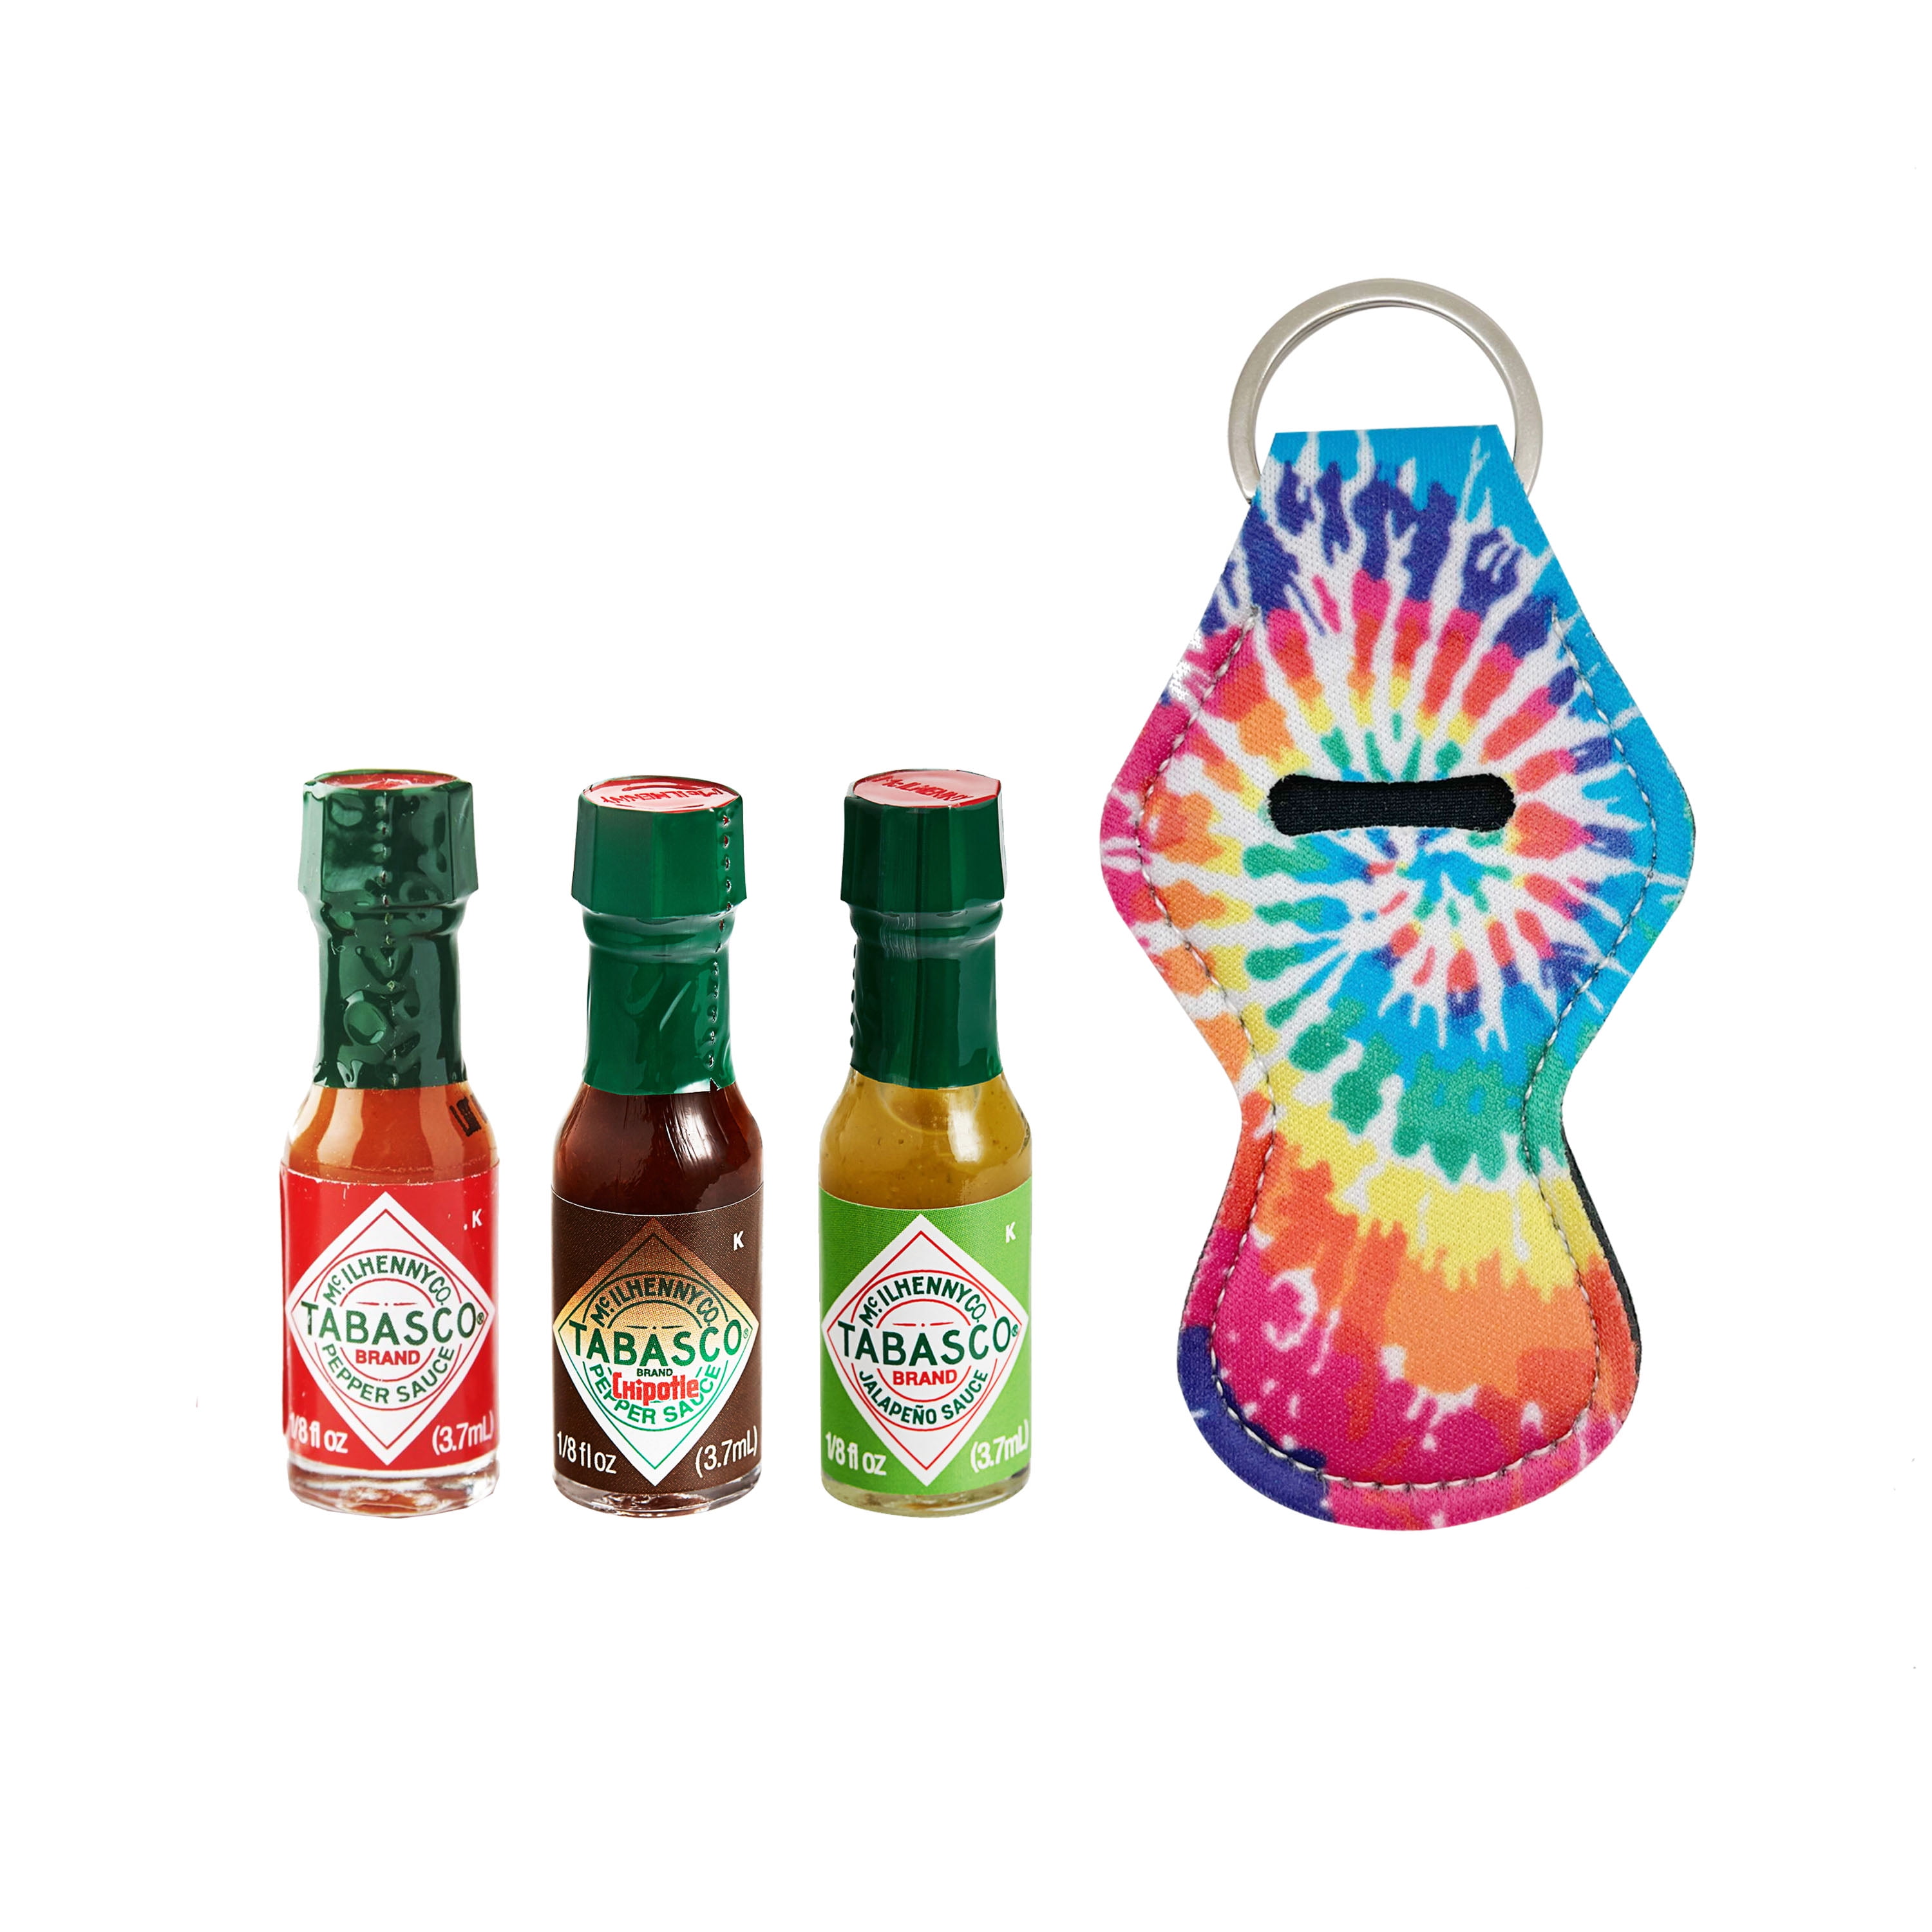 Mini Tabasco Hot Sauce Keychain - Includes 3 Mini Hot Sauce Bottles (.35oz)  With Travel Hot Sauce Key Chain and Refillable Funnel - Red Tabasco Hot